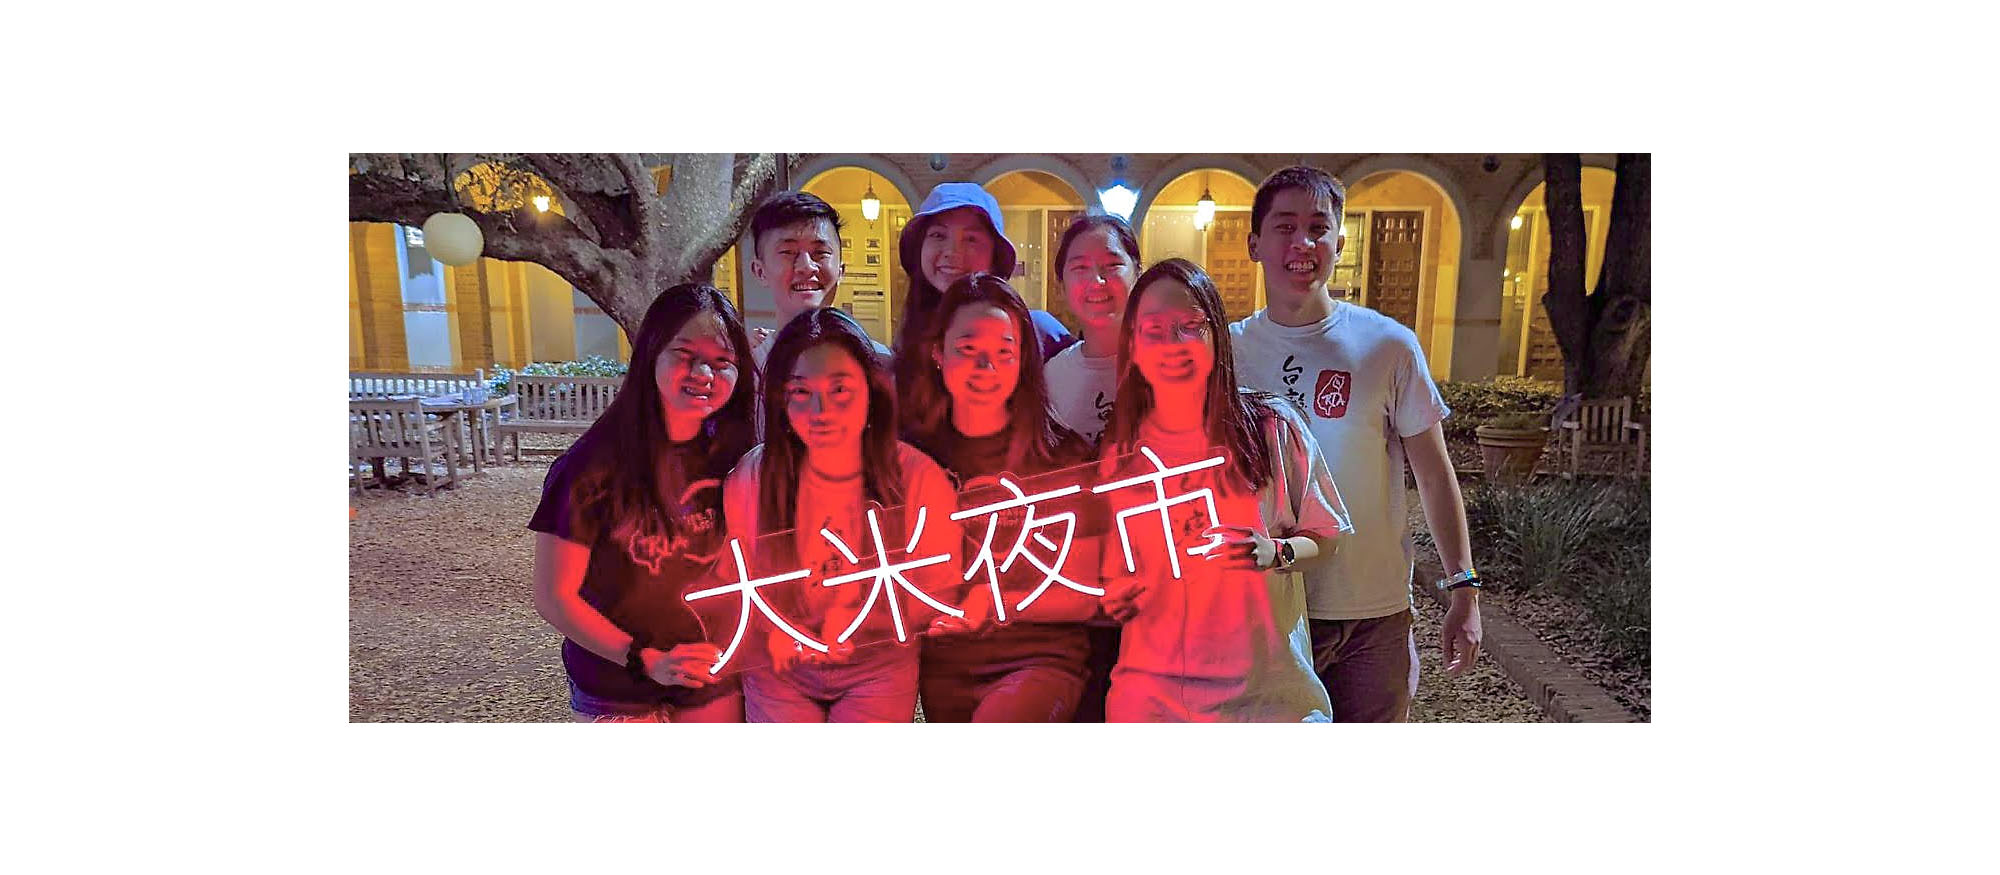 A group of male and female students from the Rice Taiwanese Association smile and pose with a neon sign that says "Rice night market" in Mandarin.